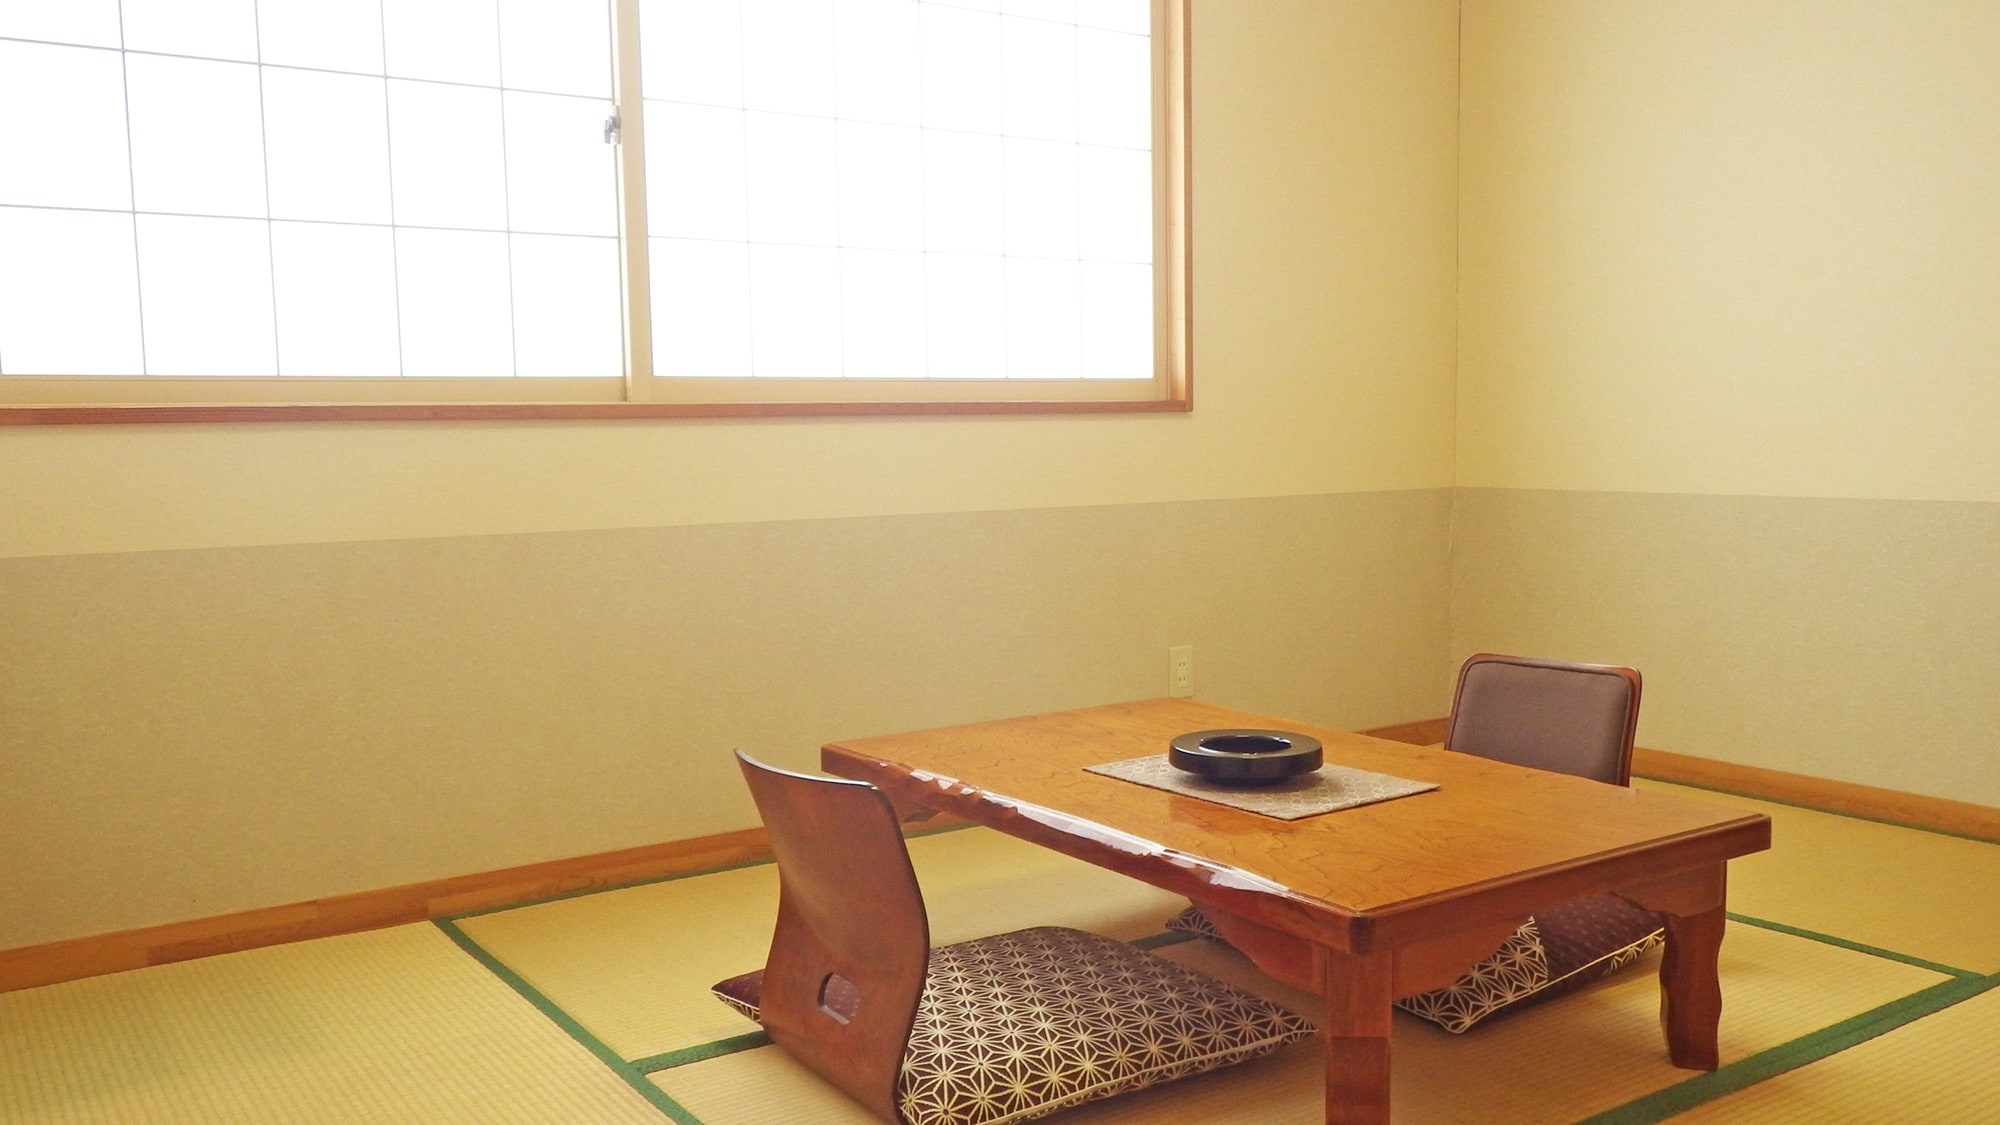 * Example of 6 tatami mats in a Japanese-style room / Please relax and stretch your legs tired from work and sightseeing. Recommended for business and solo travel.